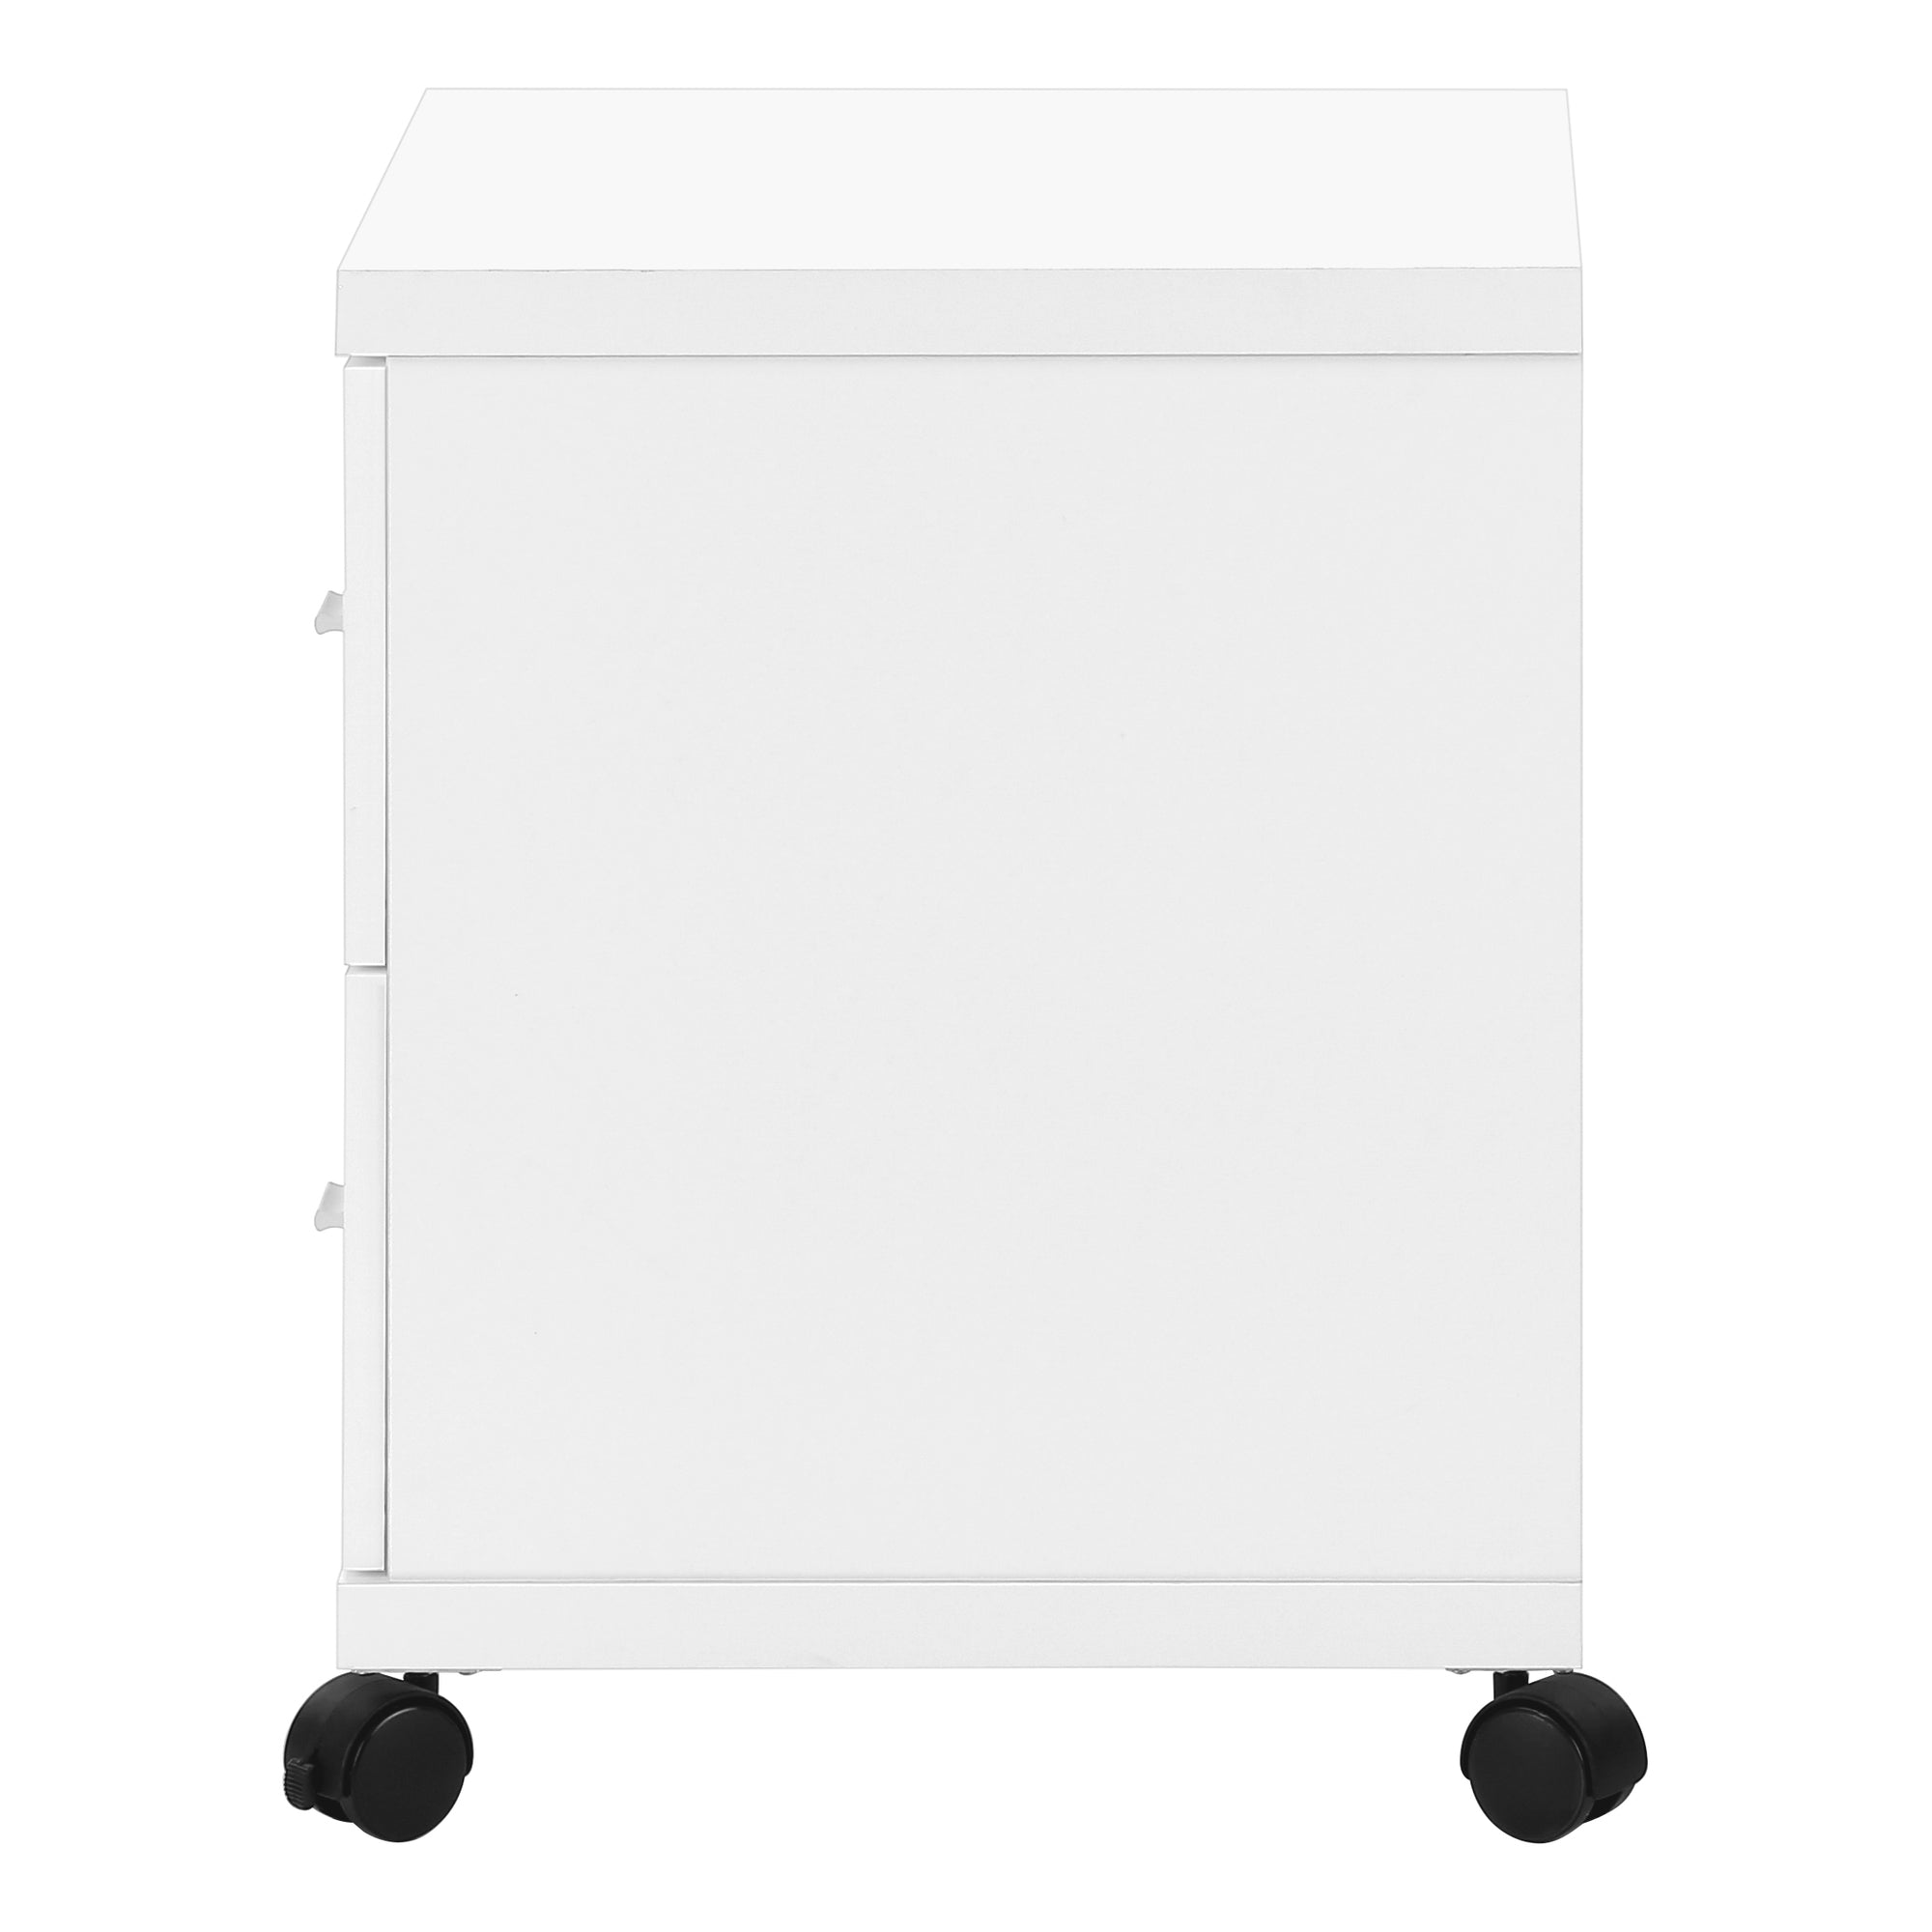 MN-857055    Office, File Cabinet, Printer Cart, Rolling File Cabinet, Mobile, Storage, Laminate, White, Contemporary, Modern